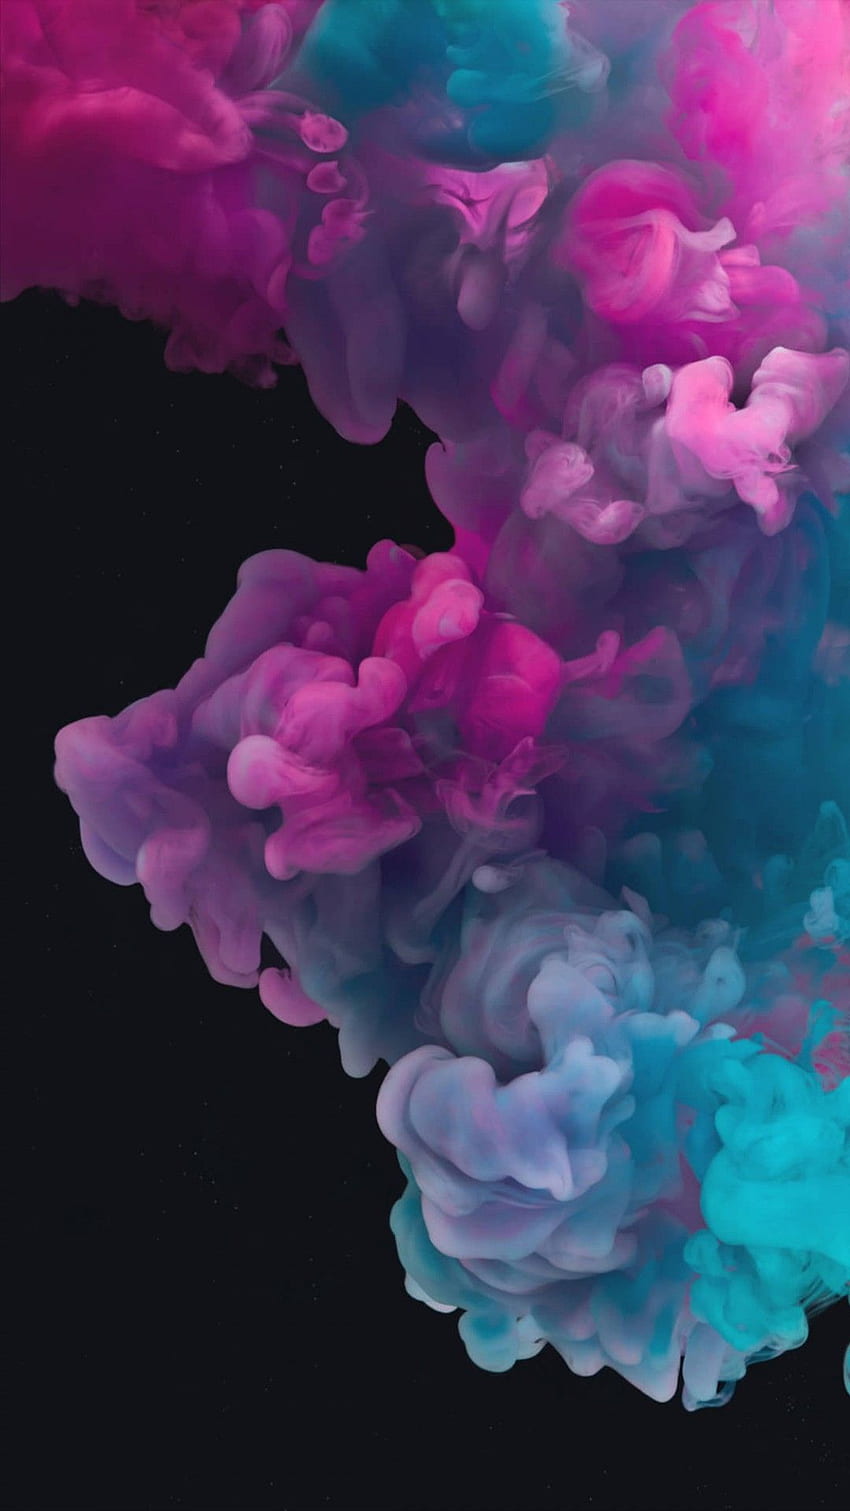 Colorful Smoke iPhone Wallpaper HD - iPhone Wallpapers